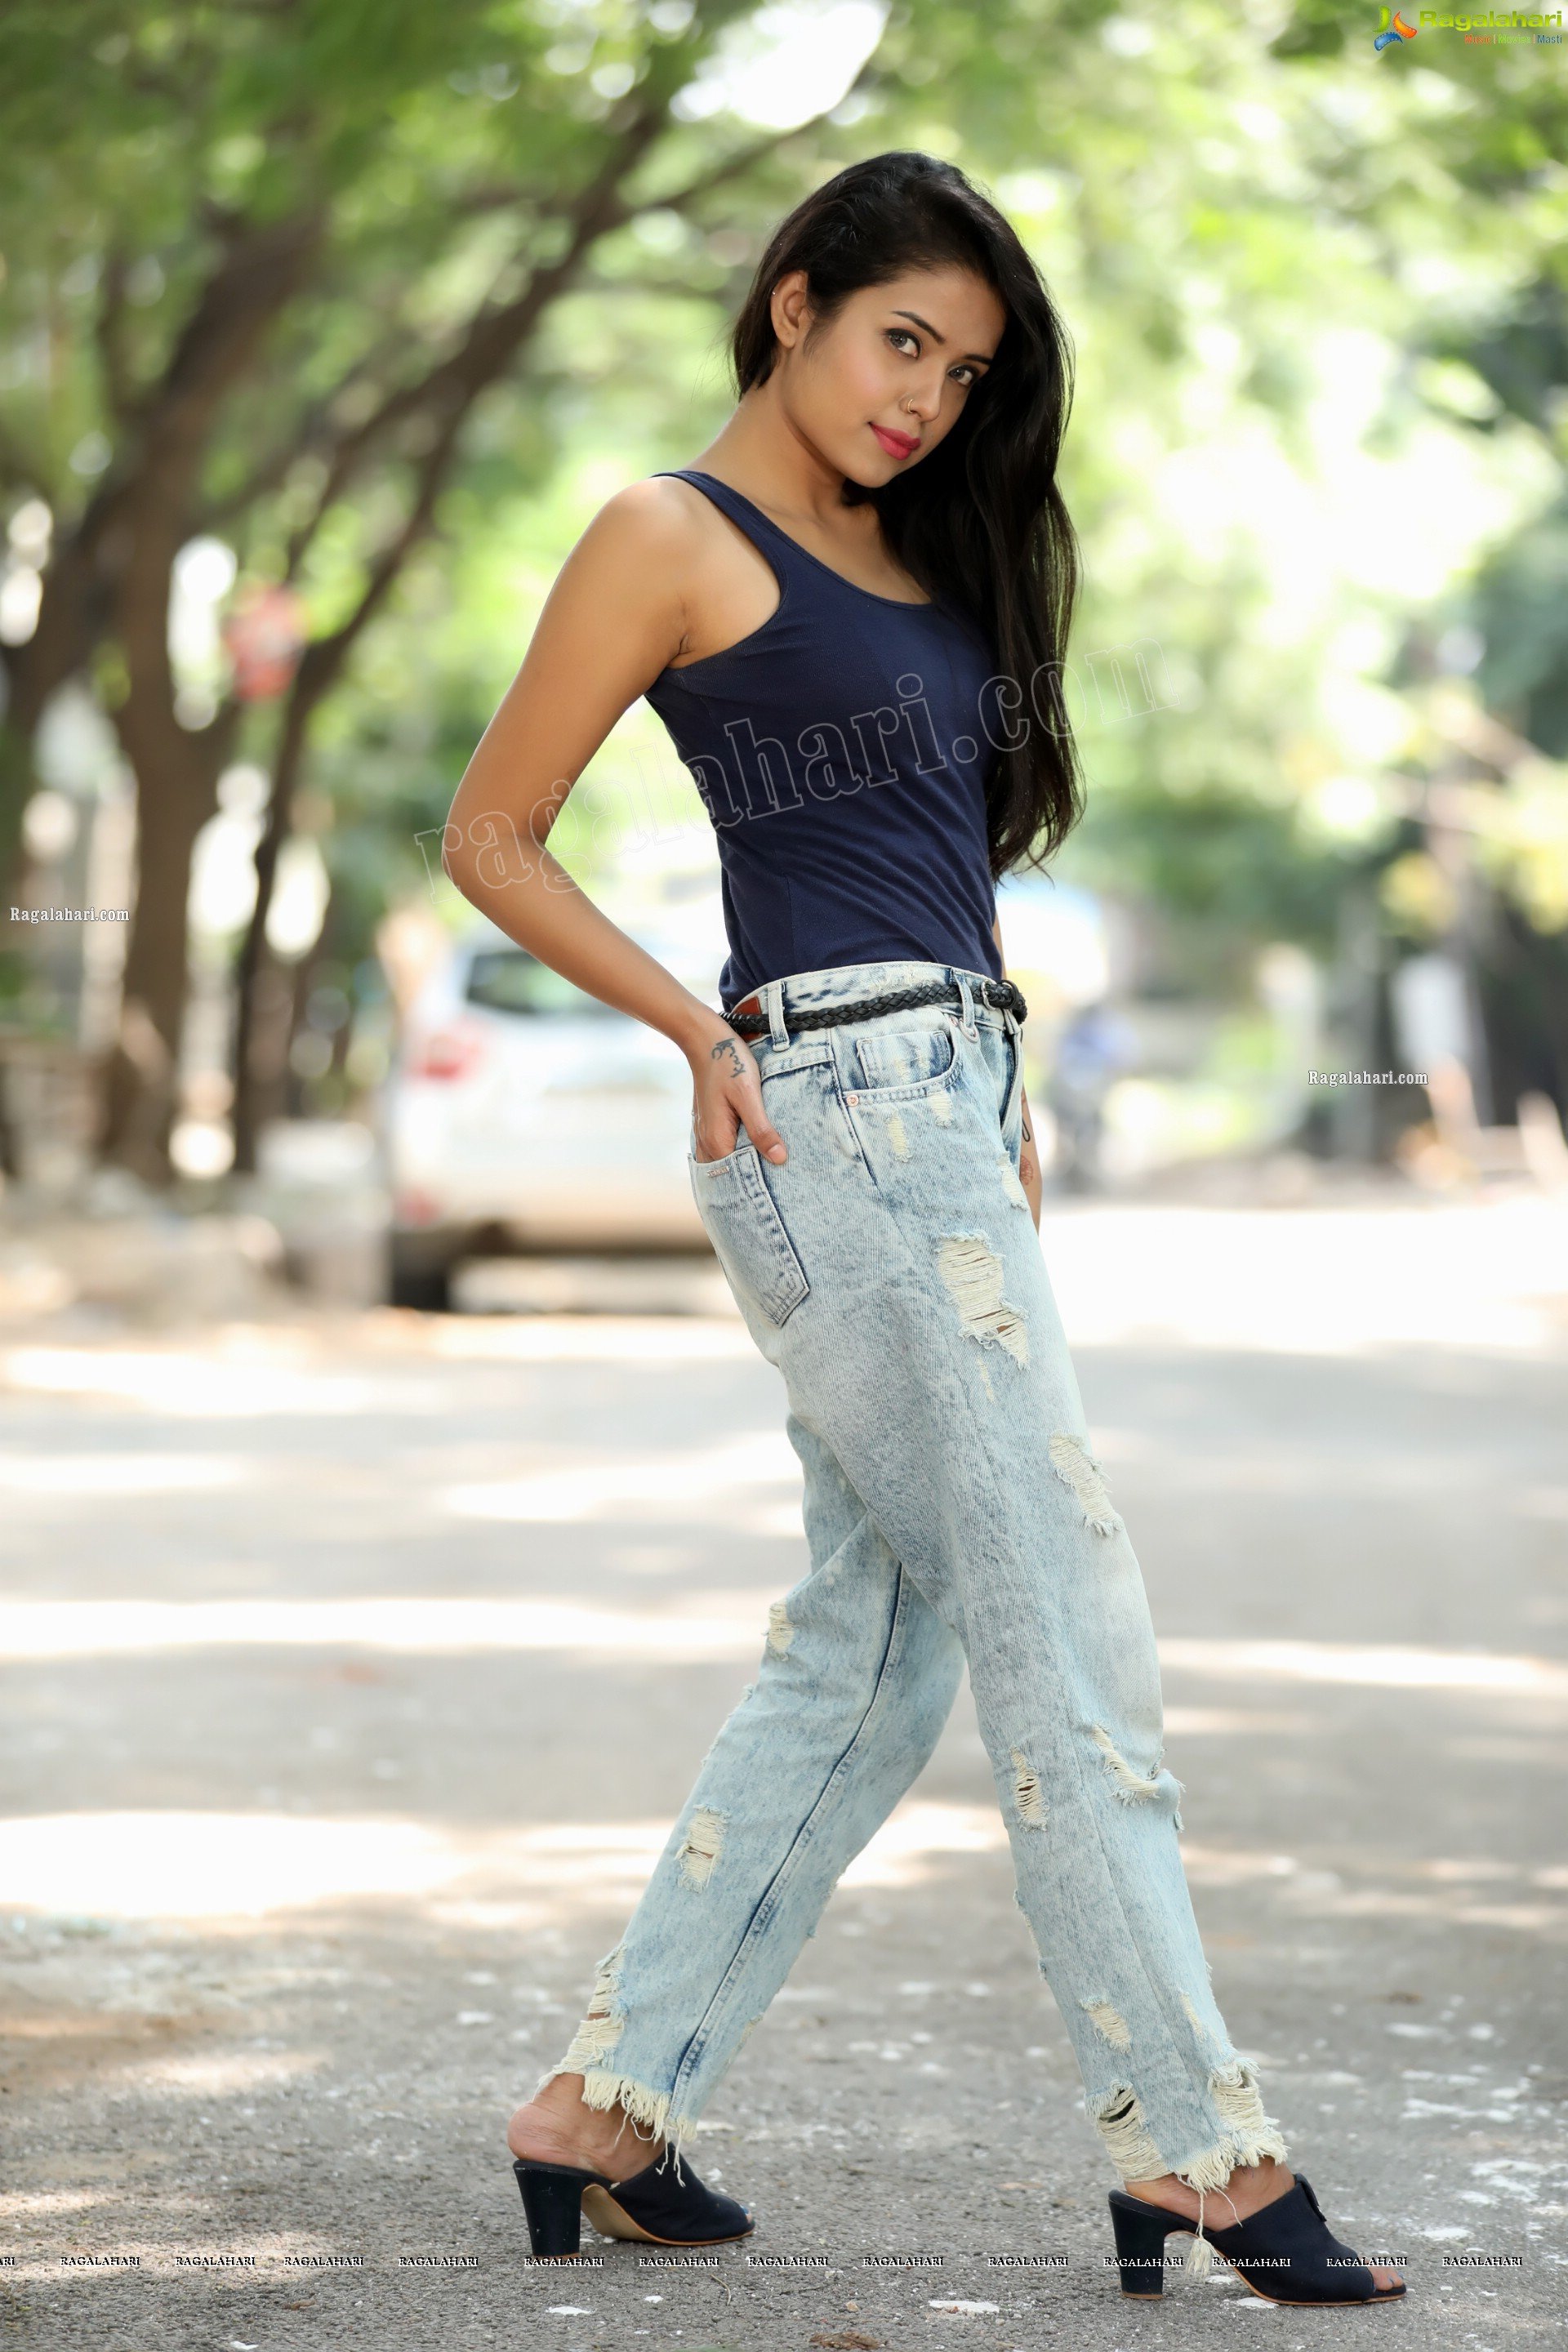 Swati Mandal in Navy Blue Tank Top and Jeans Exclusive Photo Shoot